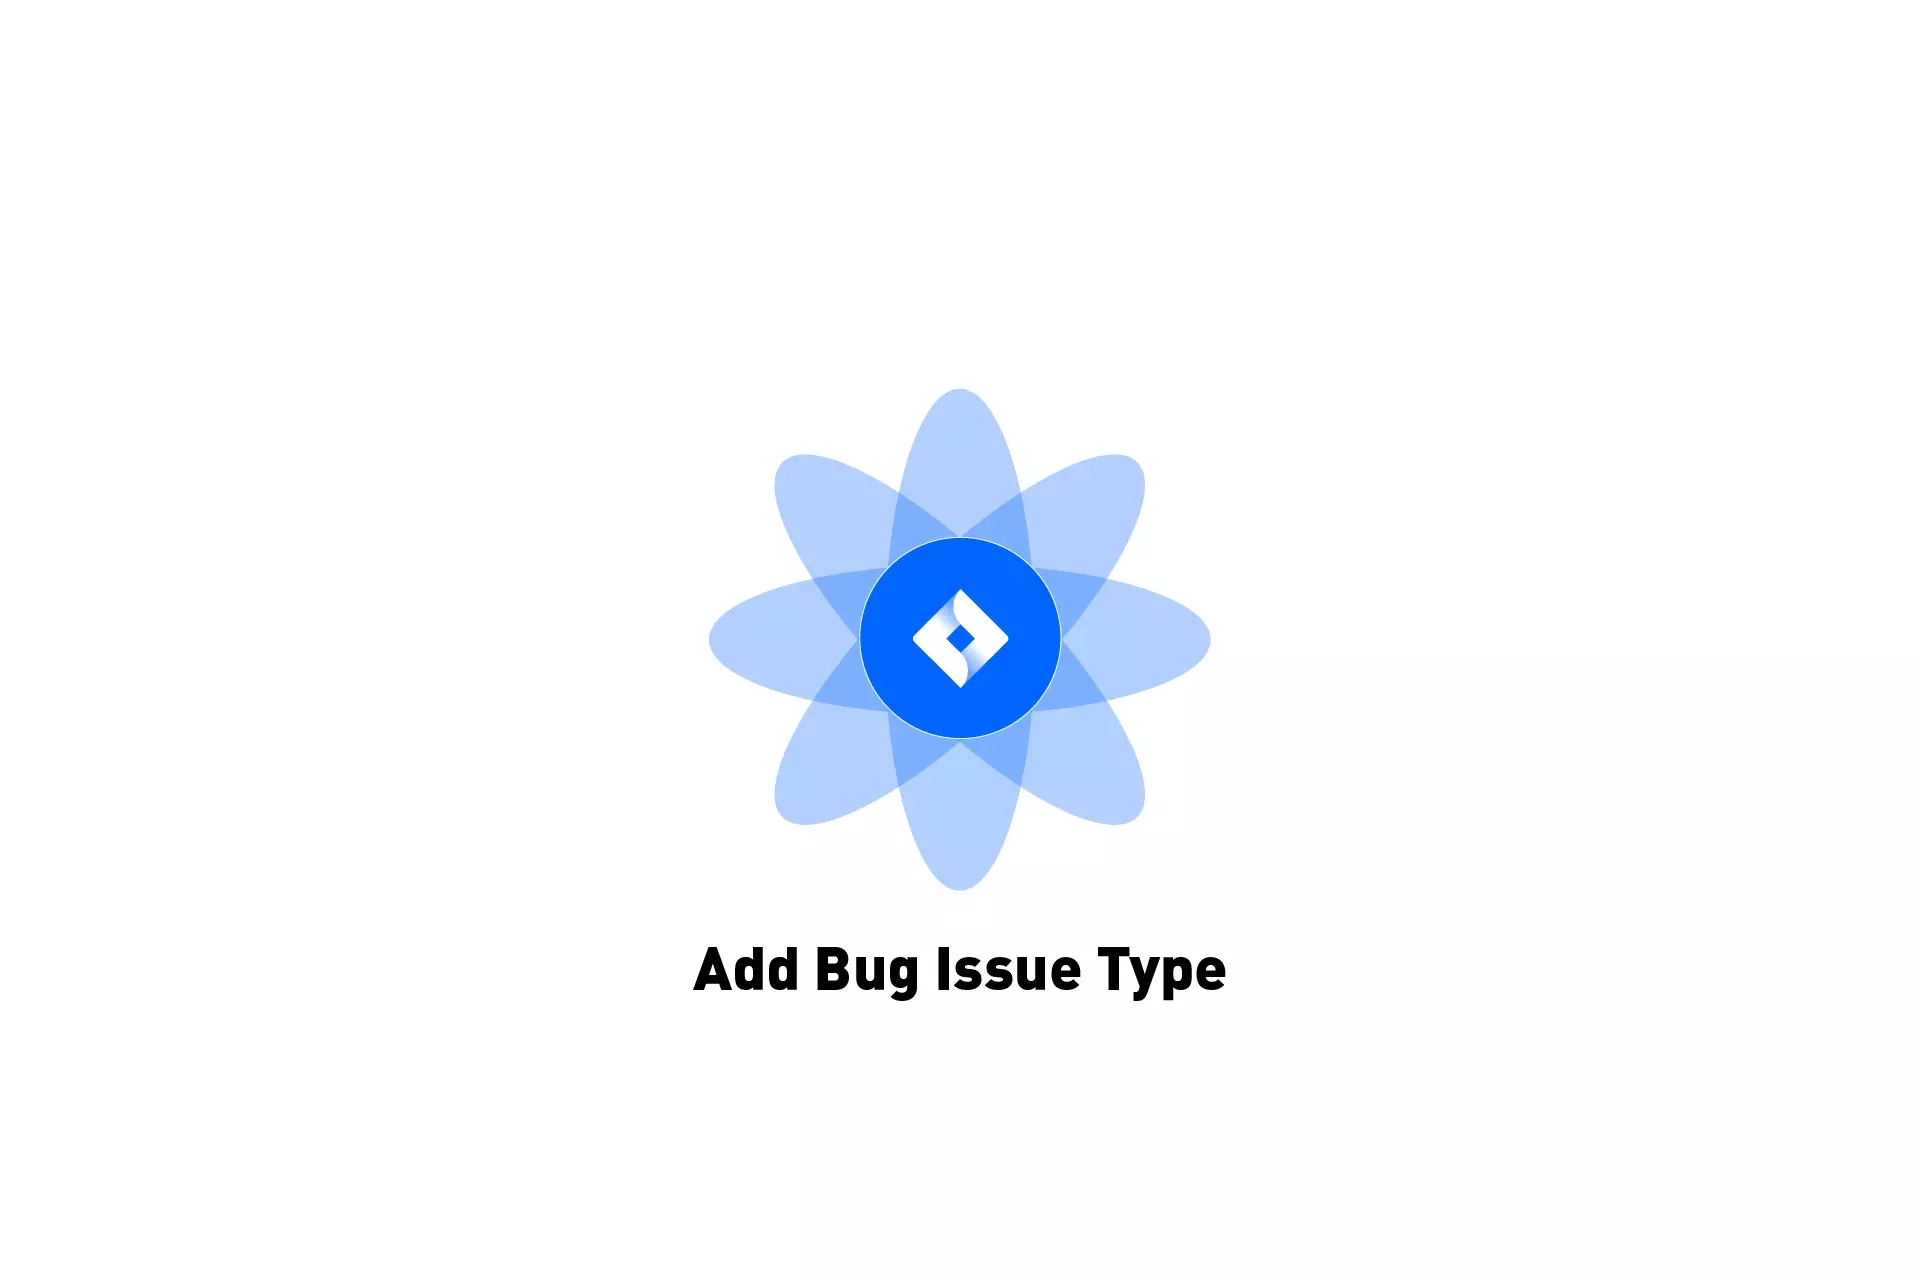 A flower that represents JIRA with the text "Add Bug Issue Type" beneath it.